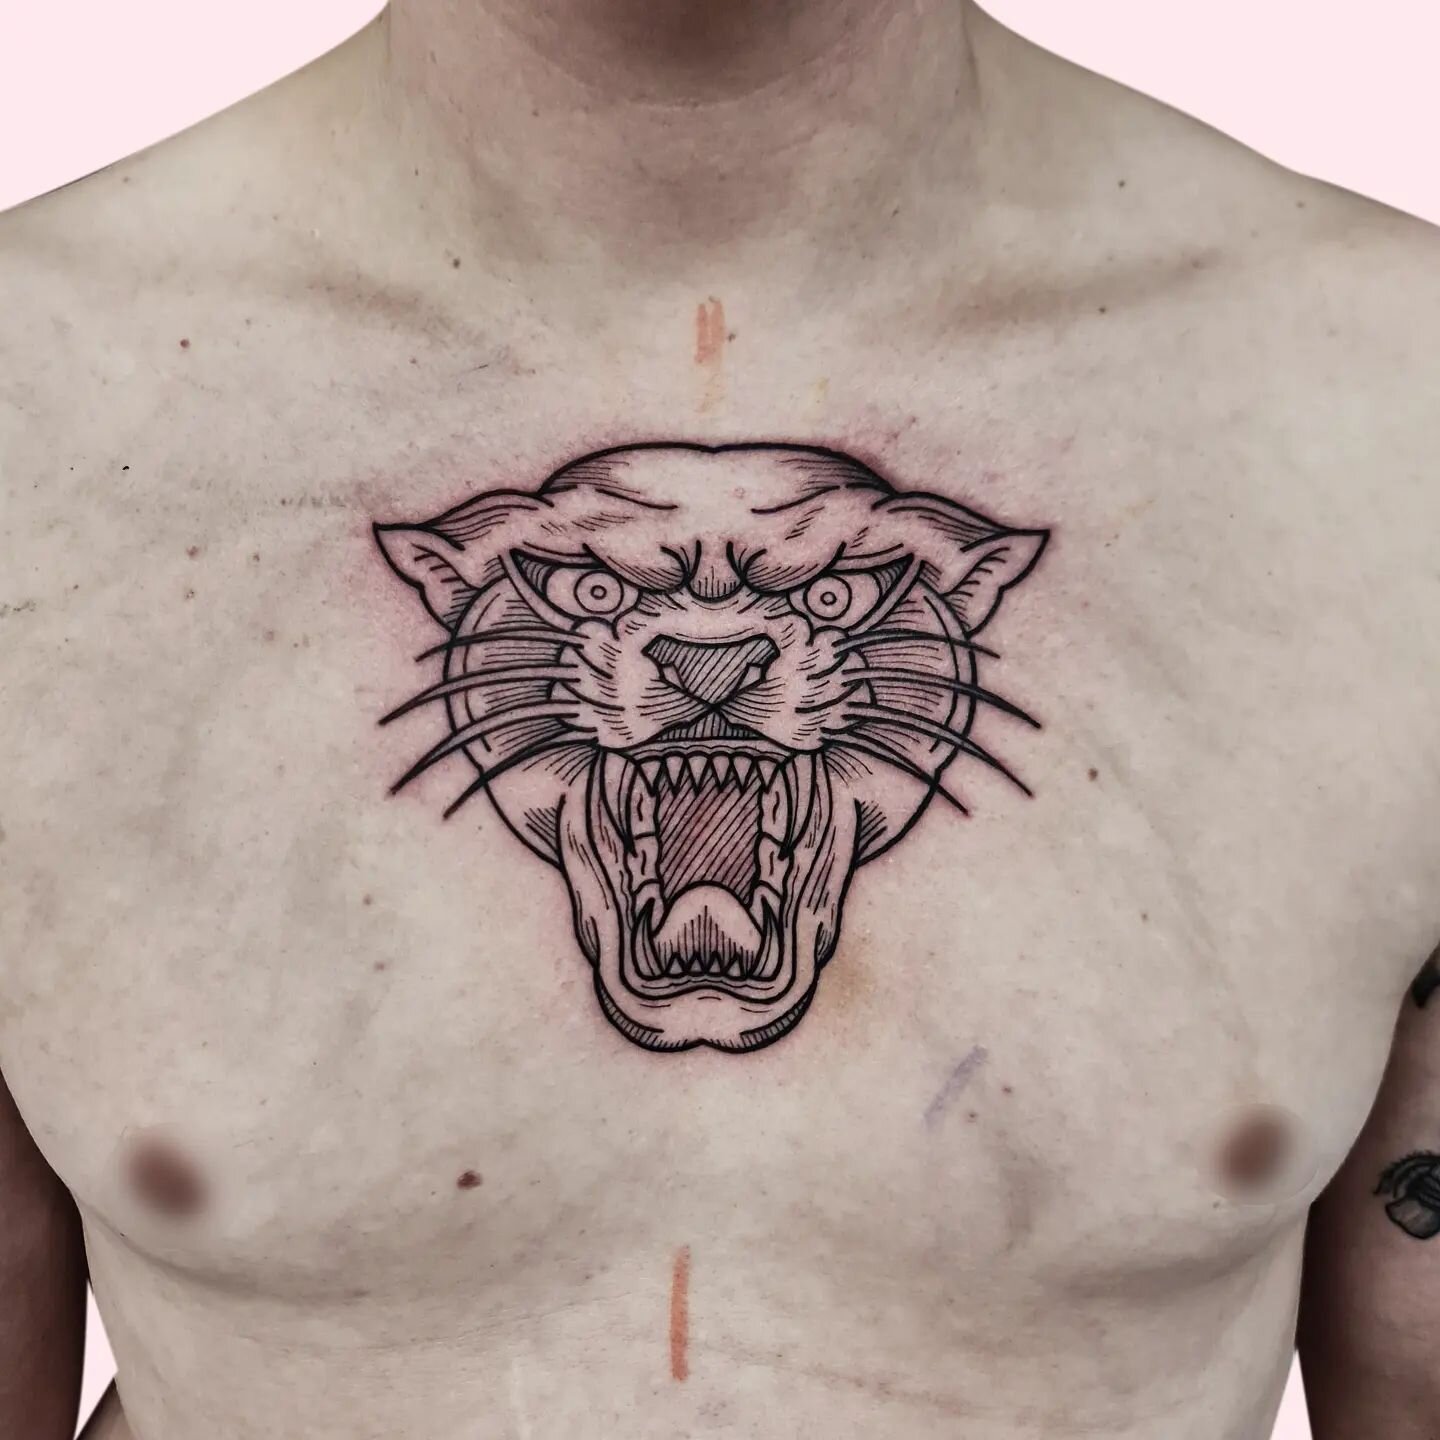 Panther engraved on chest. Create your moodboard and save for inspiration.
---------------------------------------
#flashes #tattooflash #eye #blackwork #flashtattoo #engraving #ink #eyes #art #artwork #eyes #sunday #tattoo #eyeliner #night #blackwor